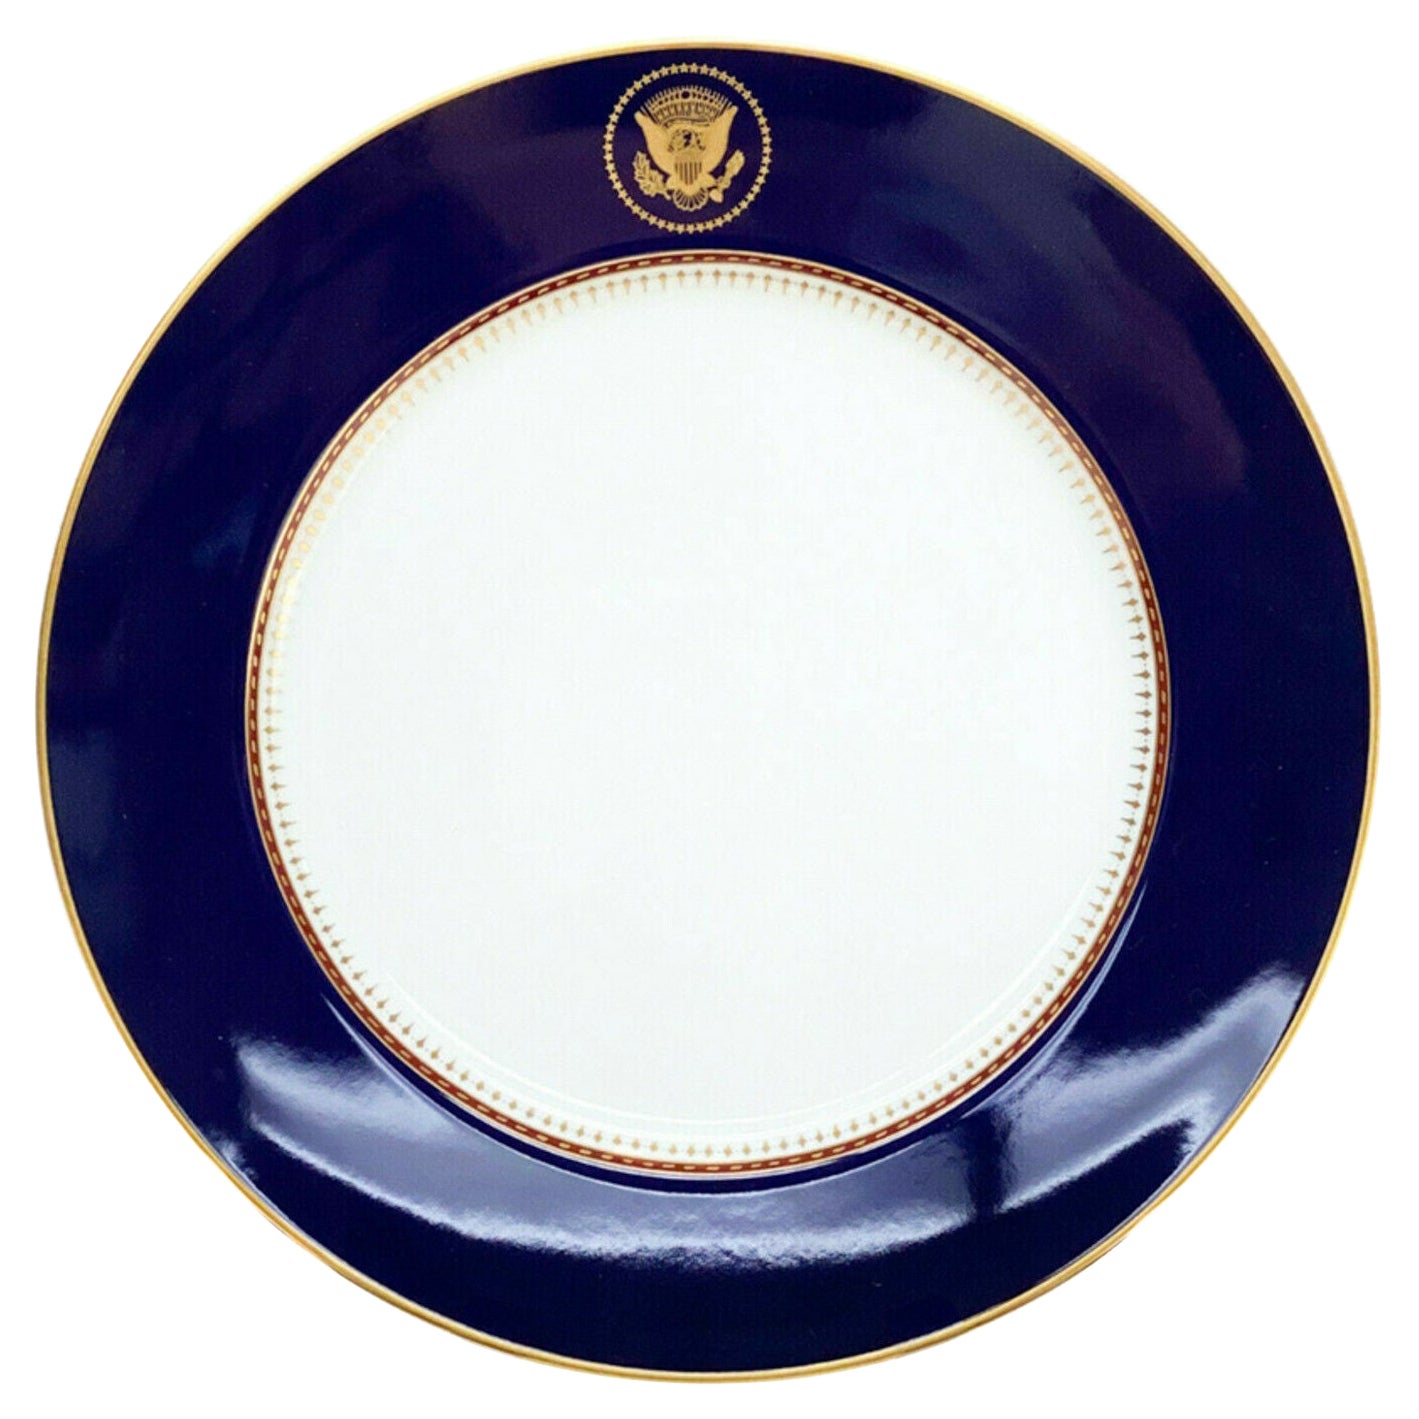 Fitz and Floyd Reagan White House Dinner Plate by Robert C. Floyd, 1983 For Sale